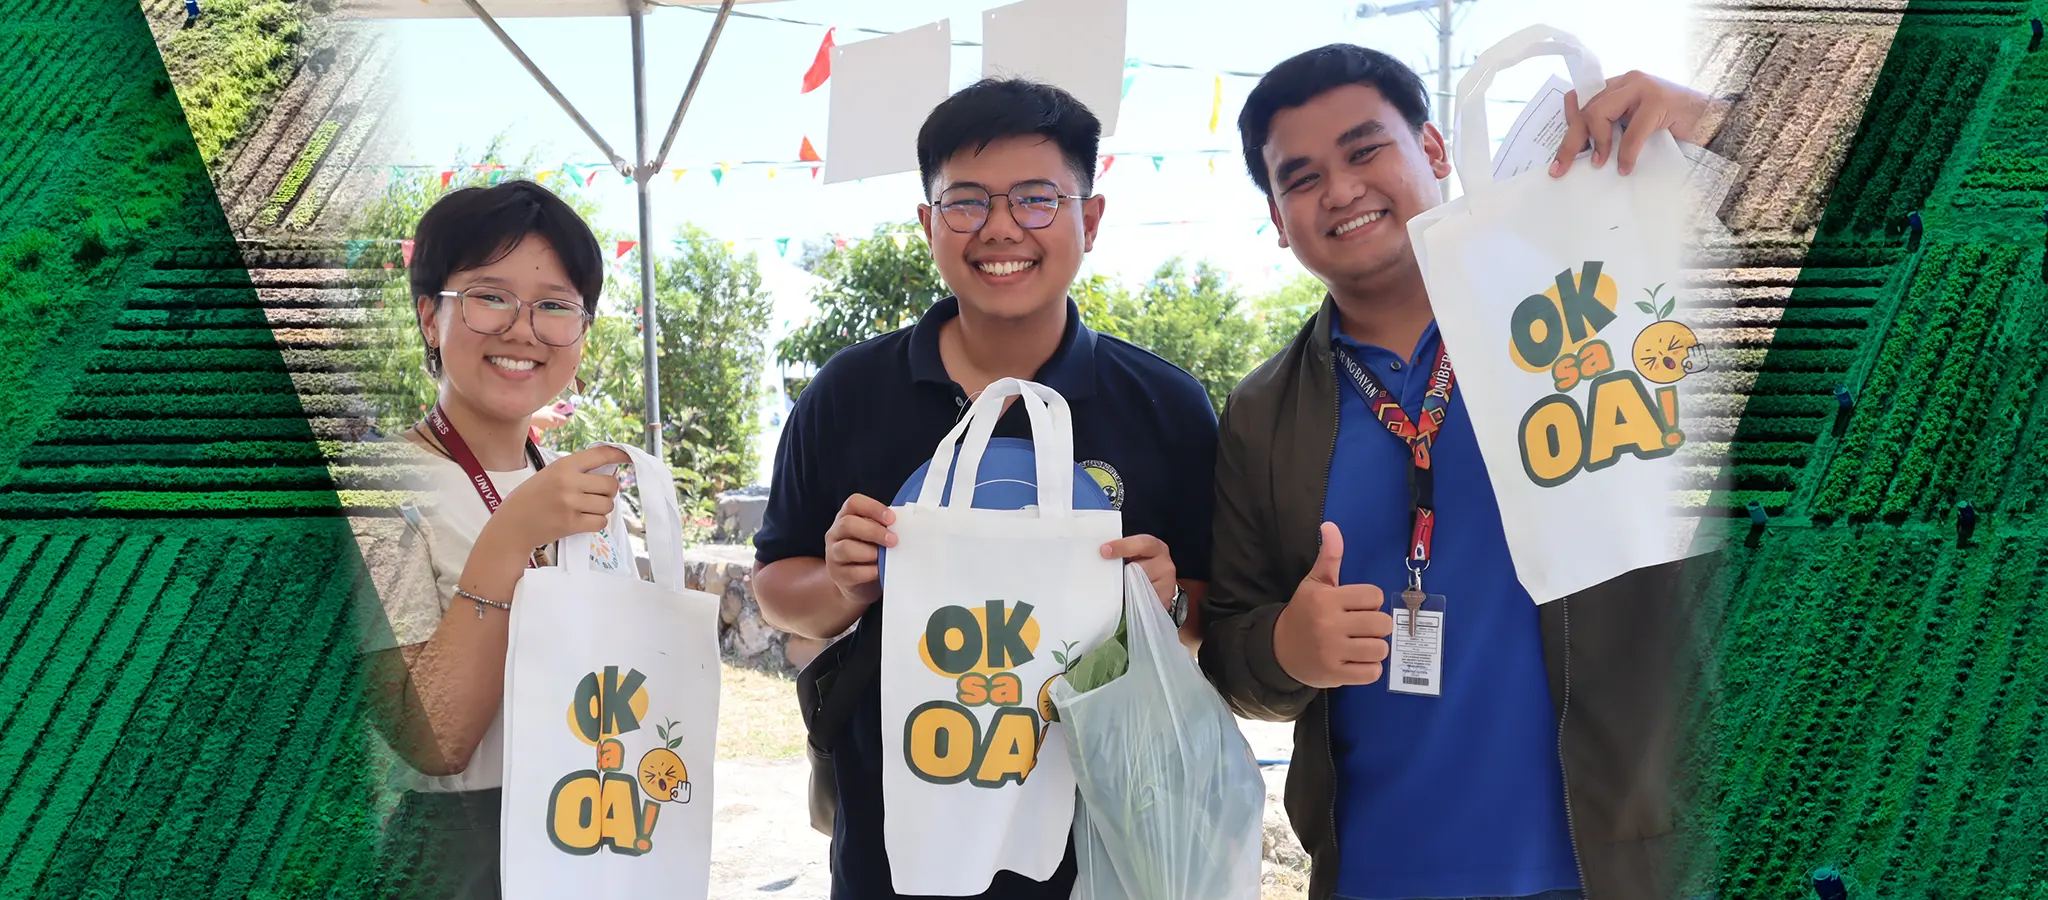 UPLB holds 2nd Organic Agriculture Fair